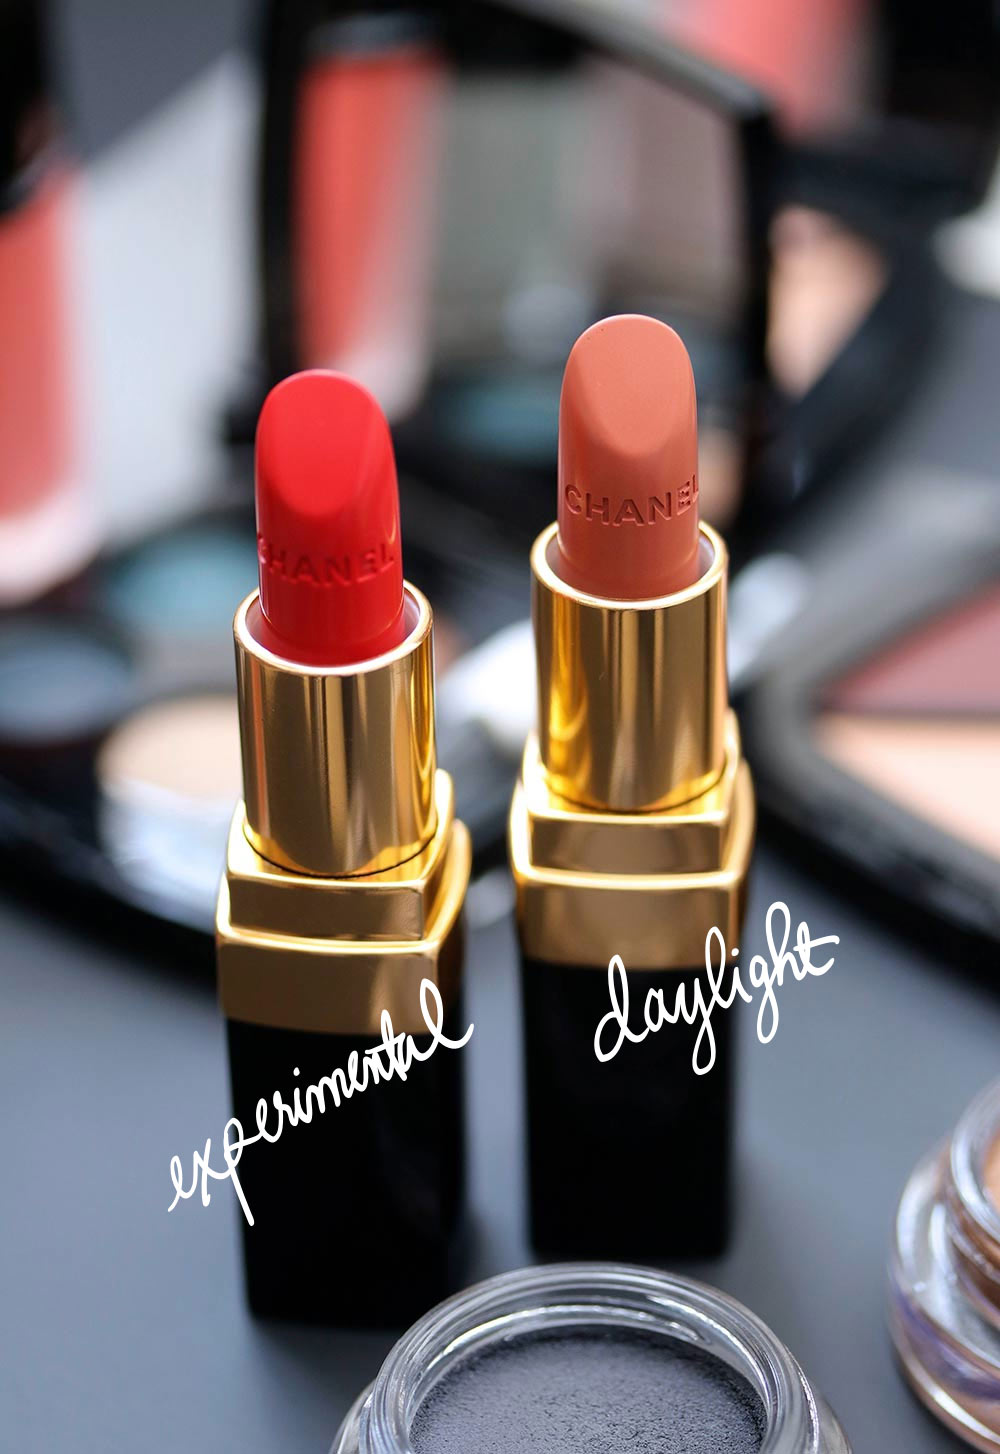 The New Chanel Travel Diary Collection Rouge Coco Lipsticks in